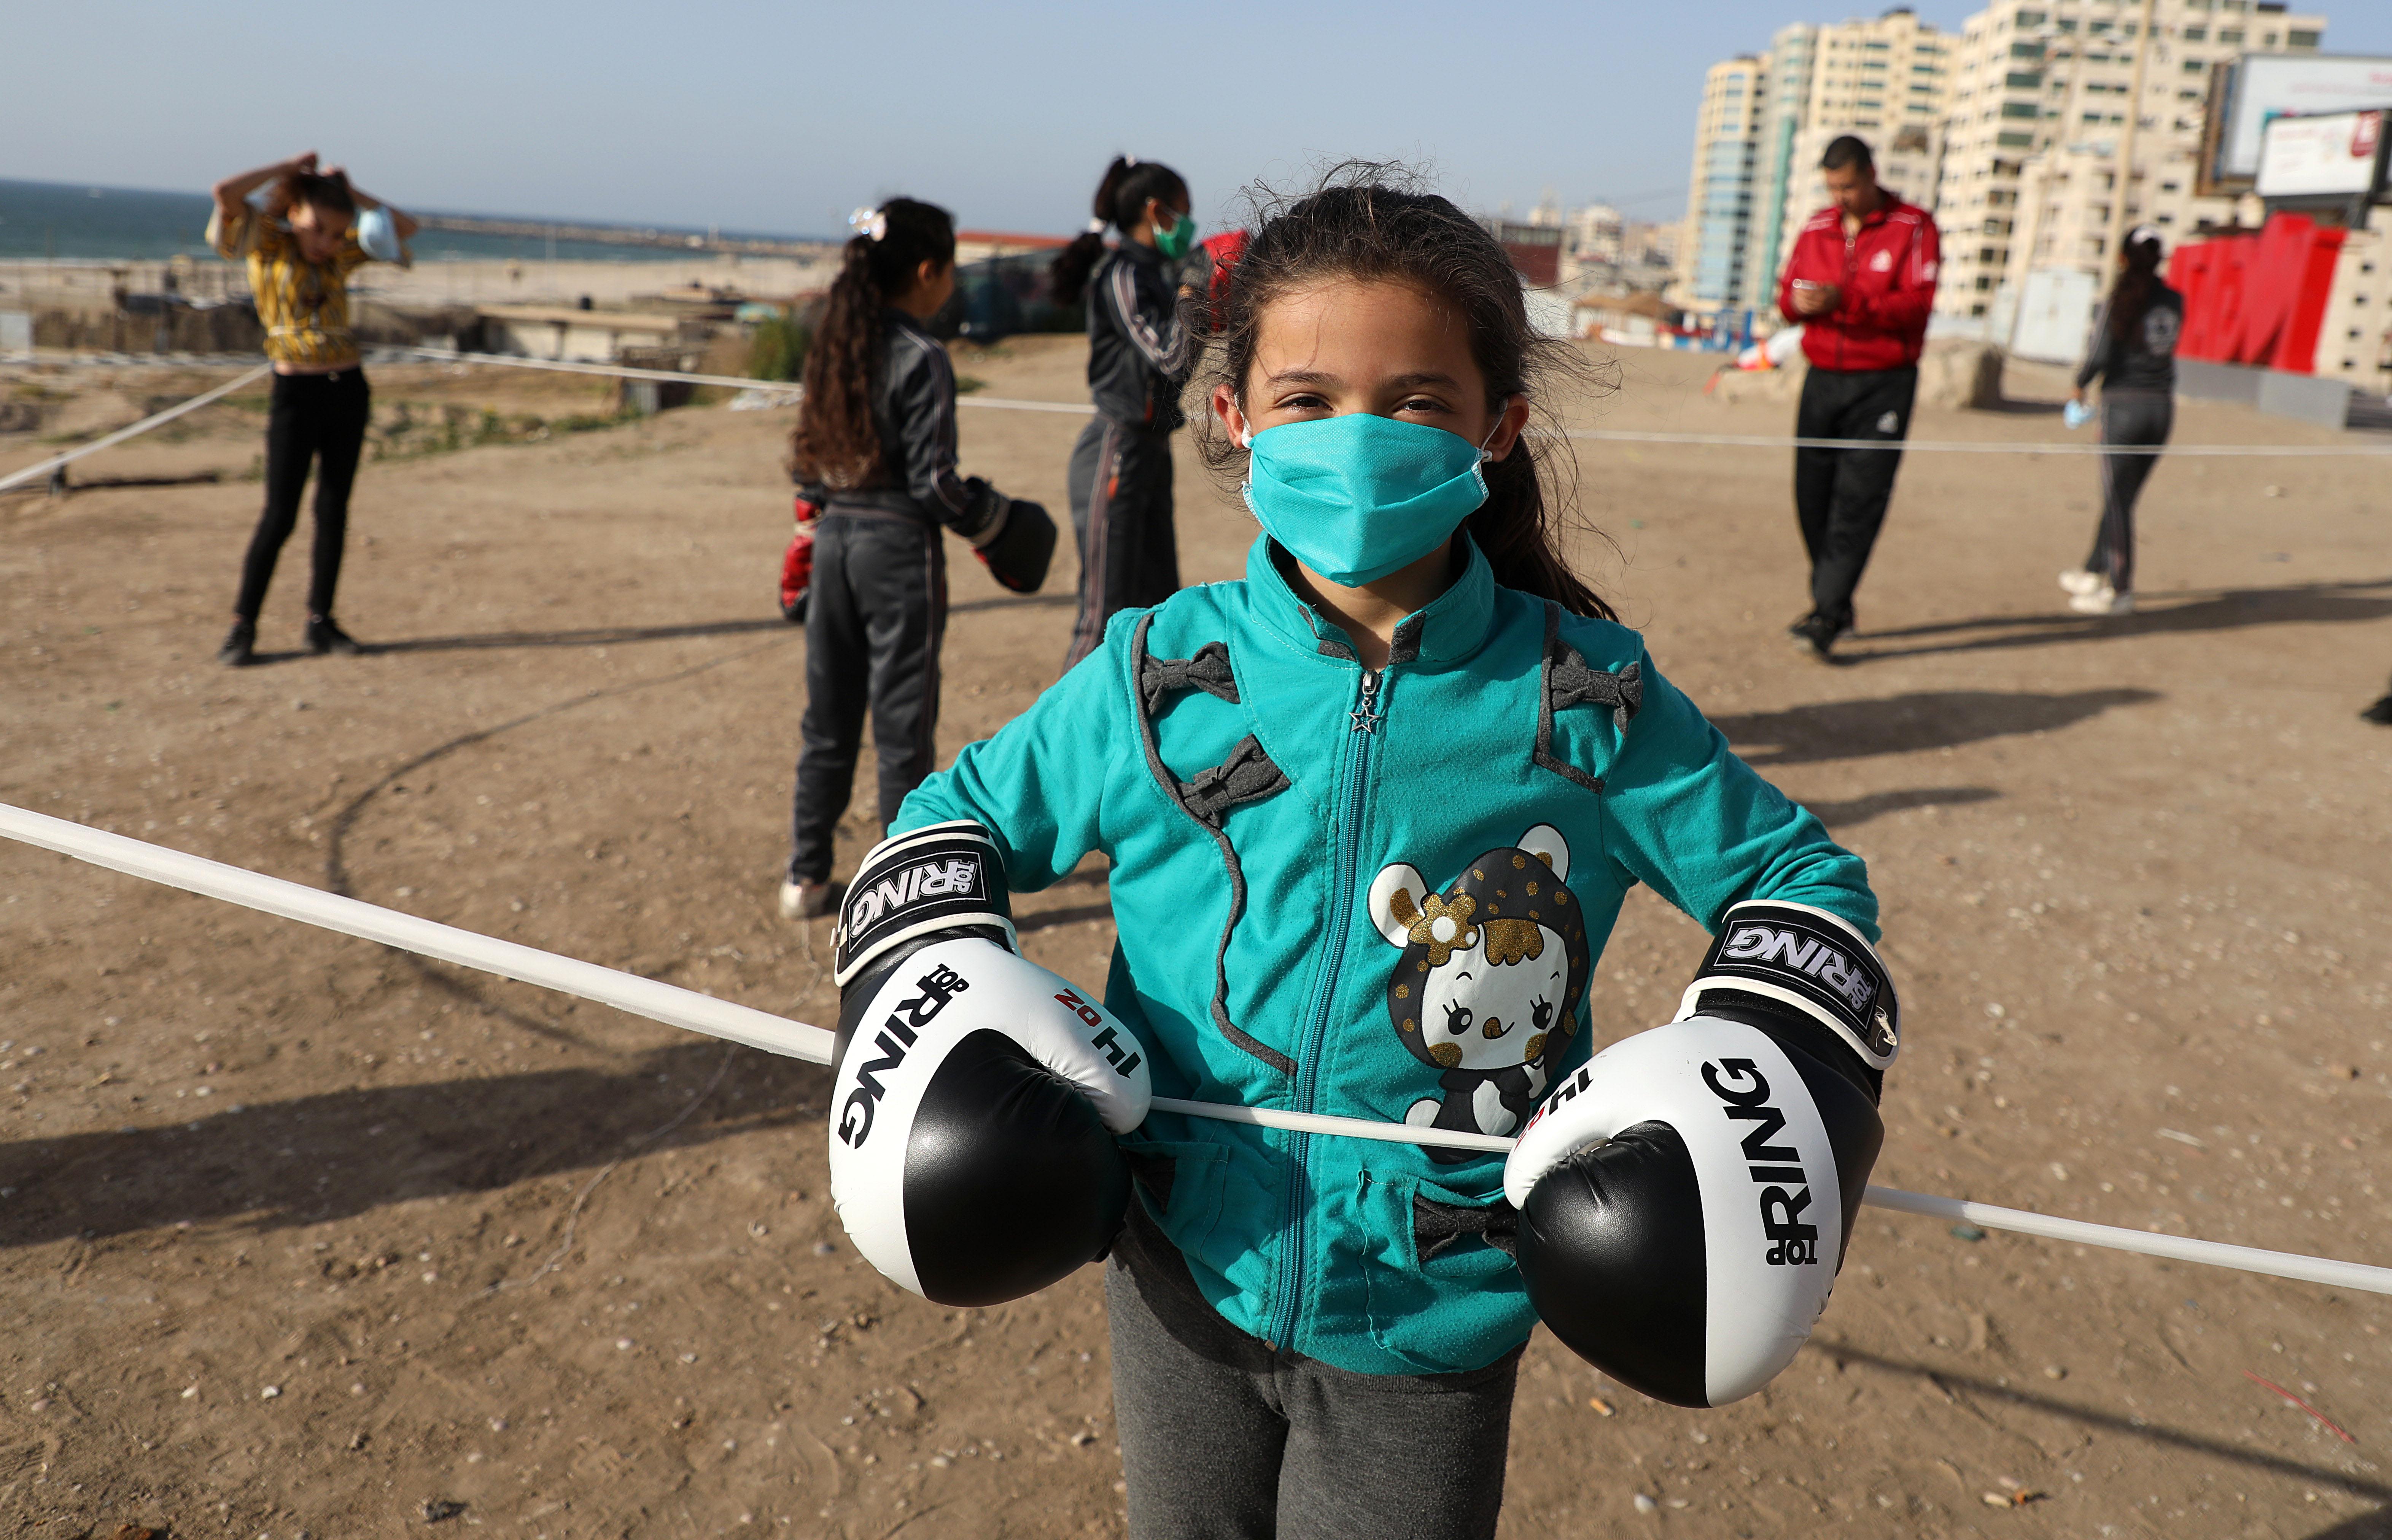 Palestinian girls clad in masks due to the COVID-19 coronavirus pandemic take part in an open-air boxing training near the beach in Gaza City on May 12, 2020. (Photo by Majdi Fathi/NurPhoto via Getty Images)